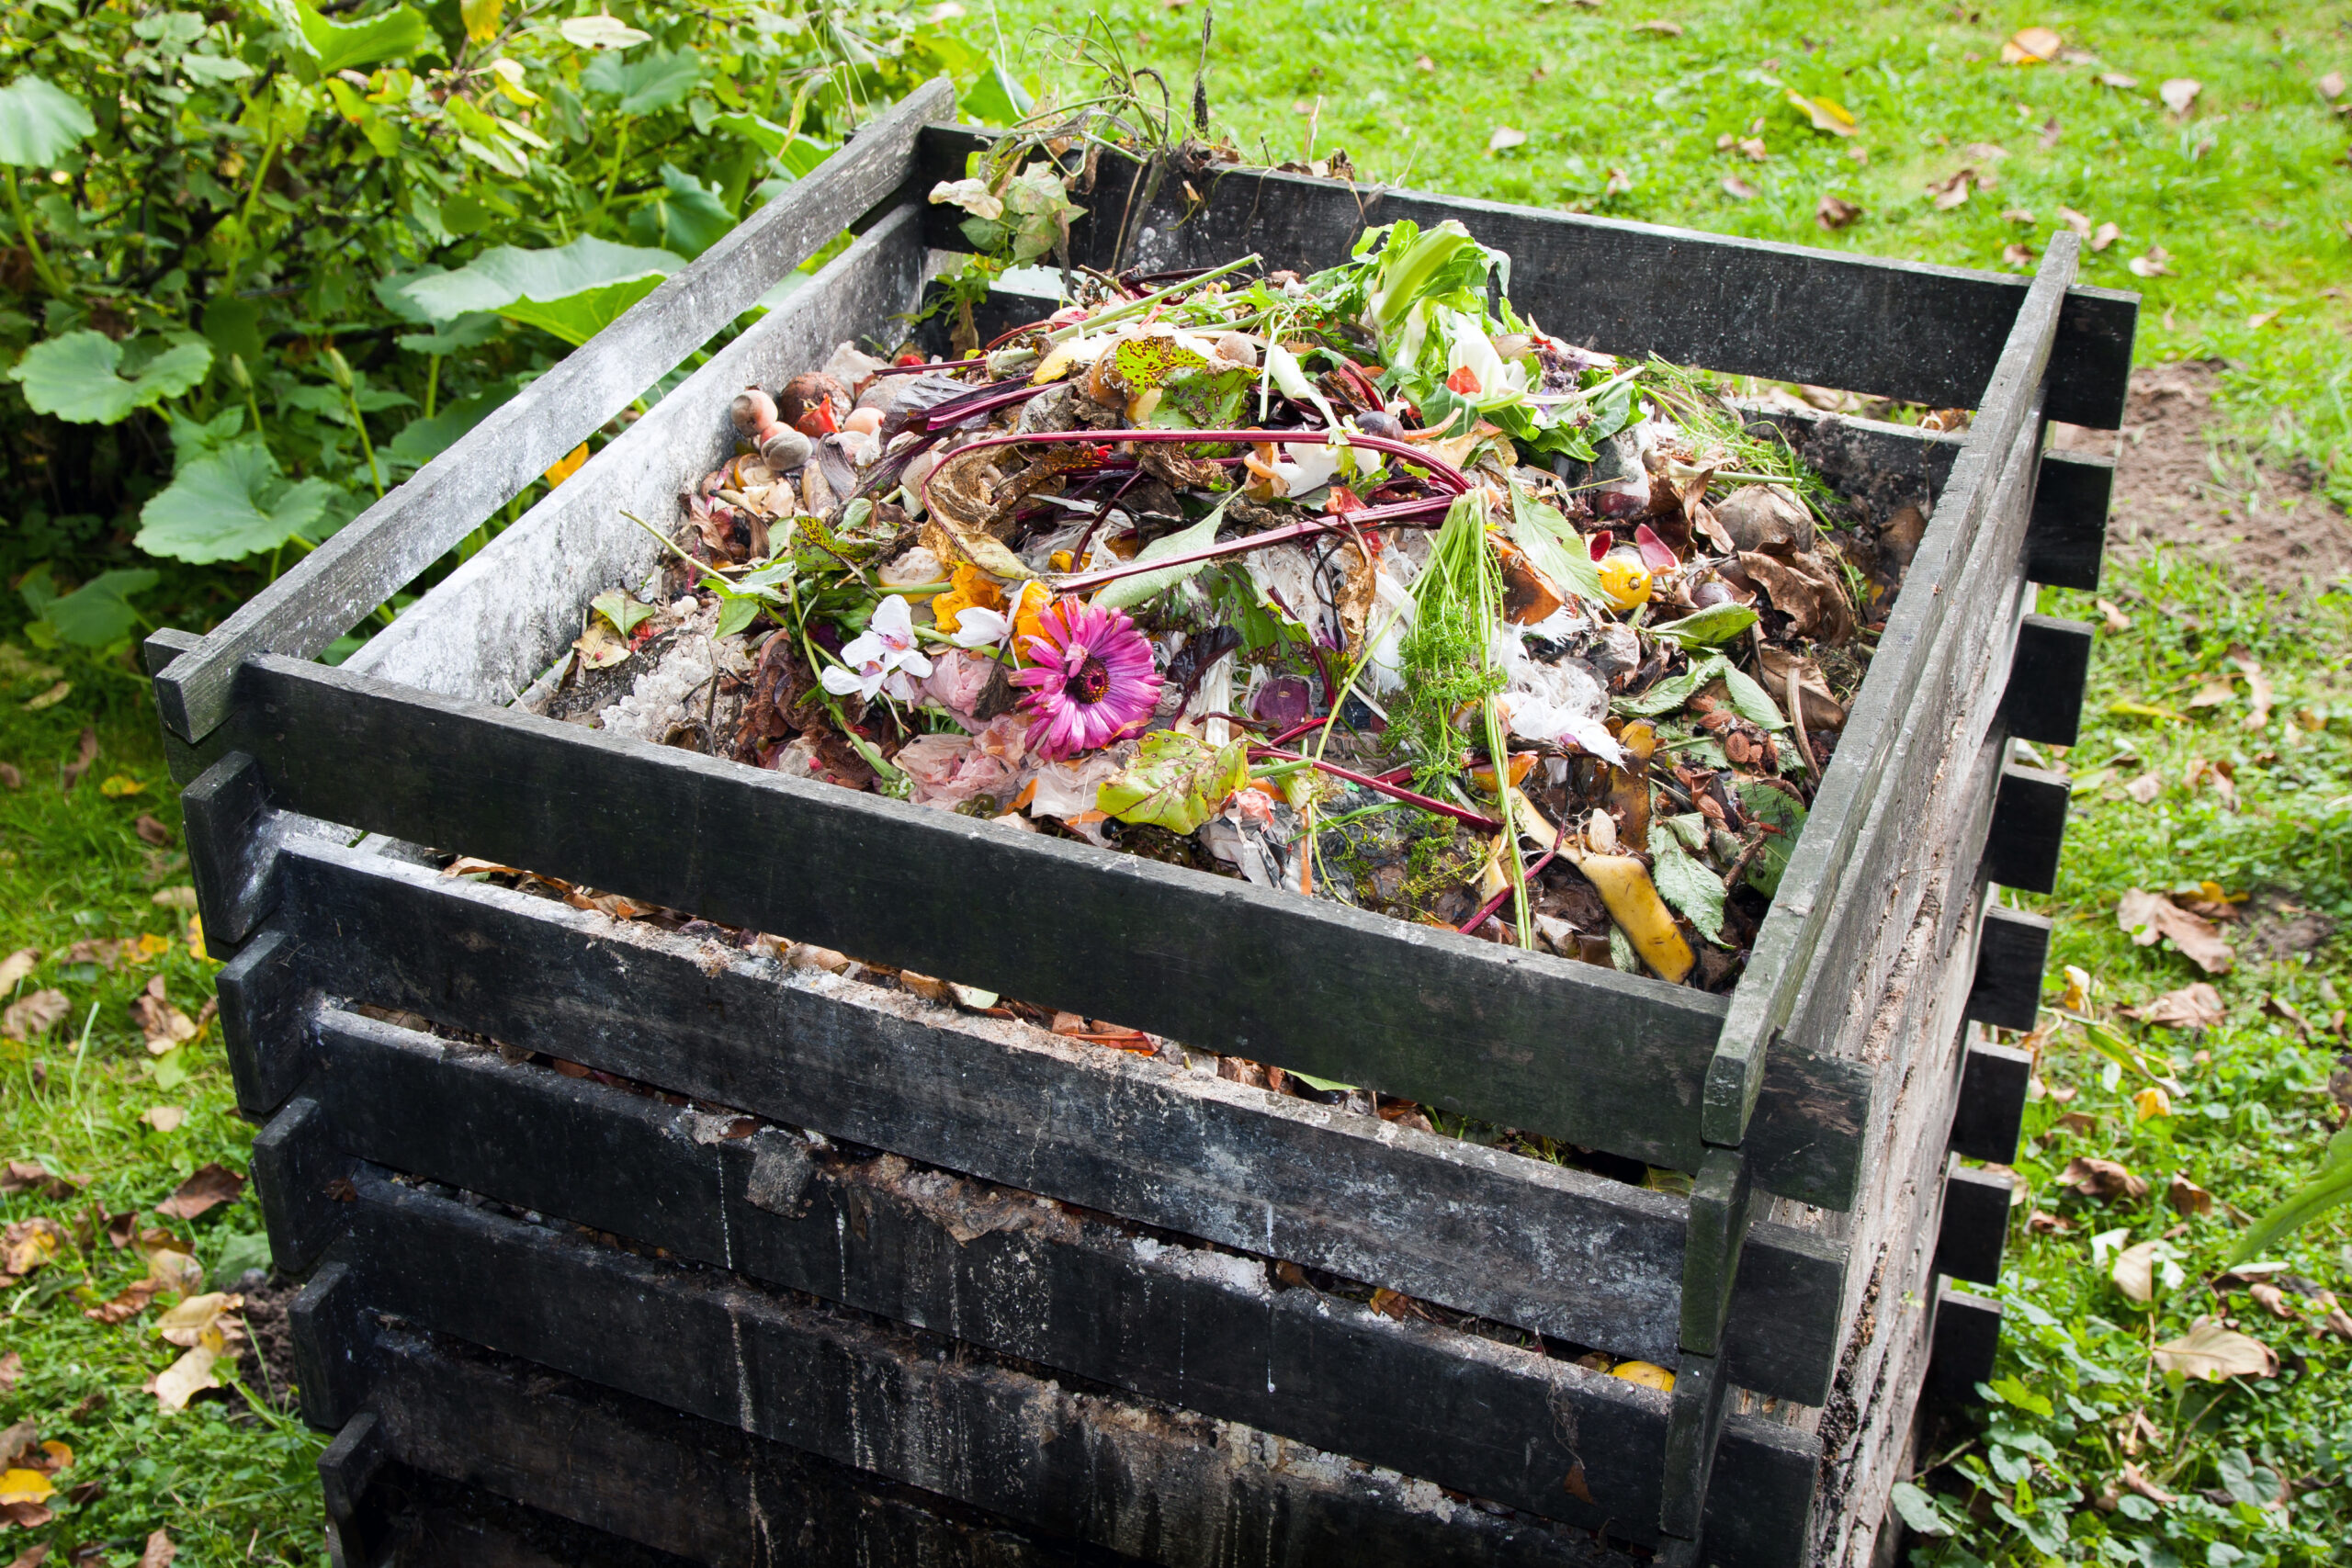 Eco-friendly packaging could be poisoning our compost